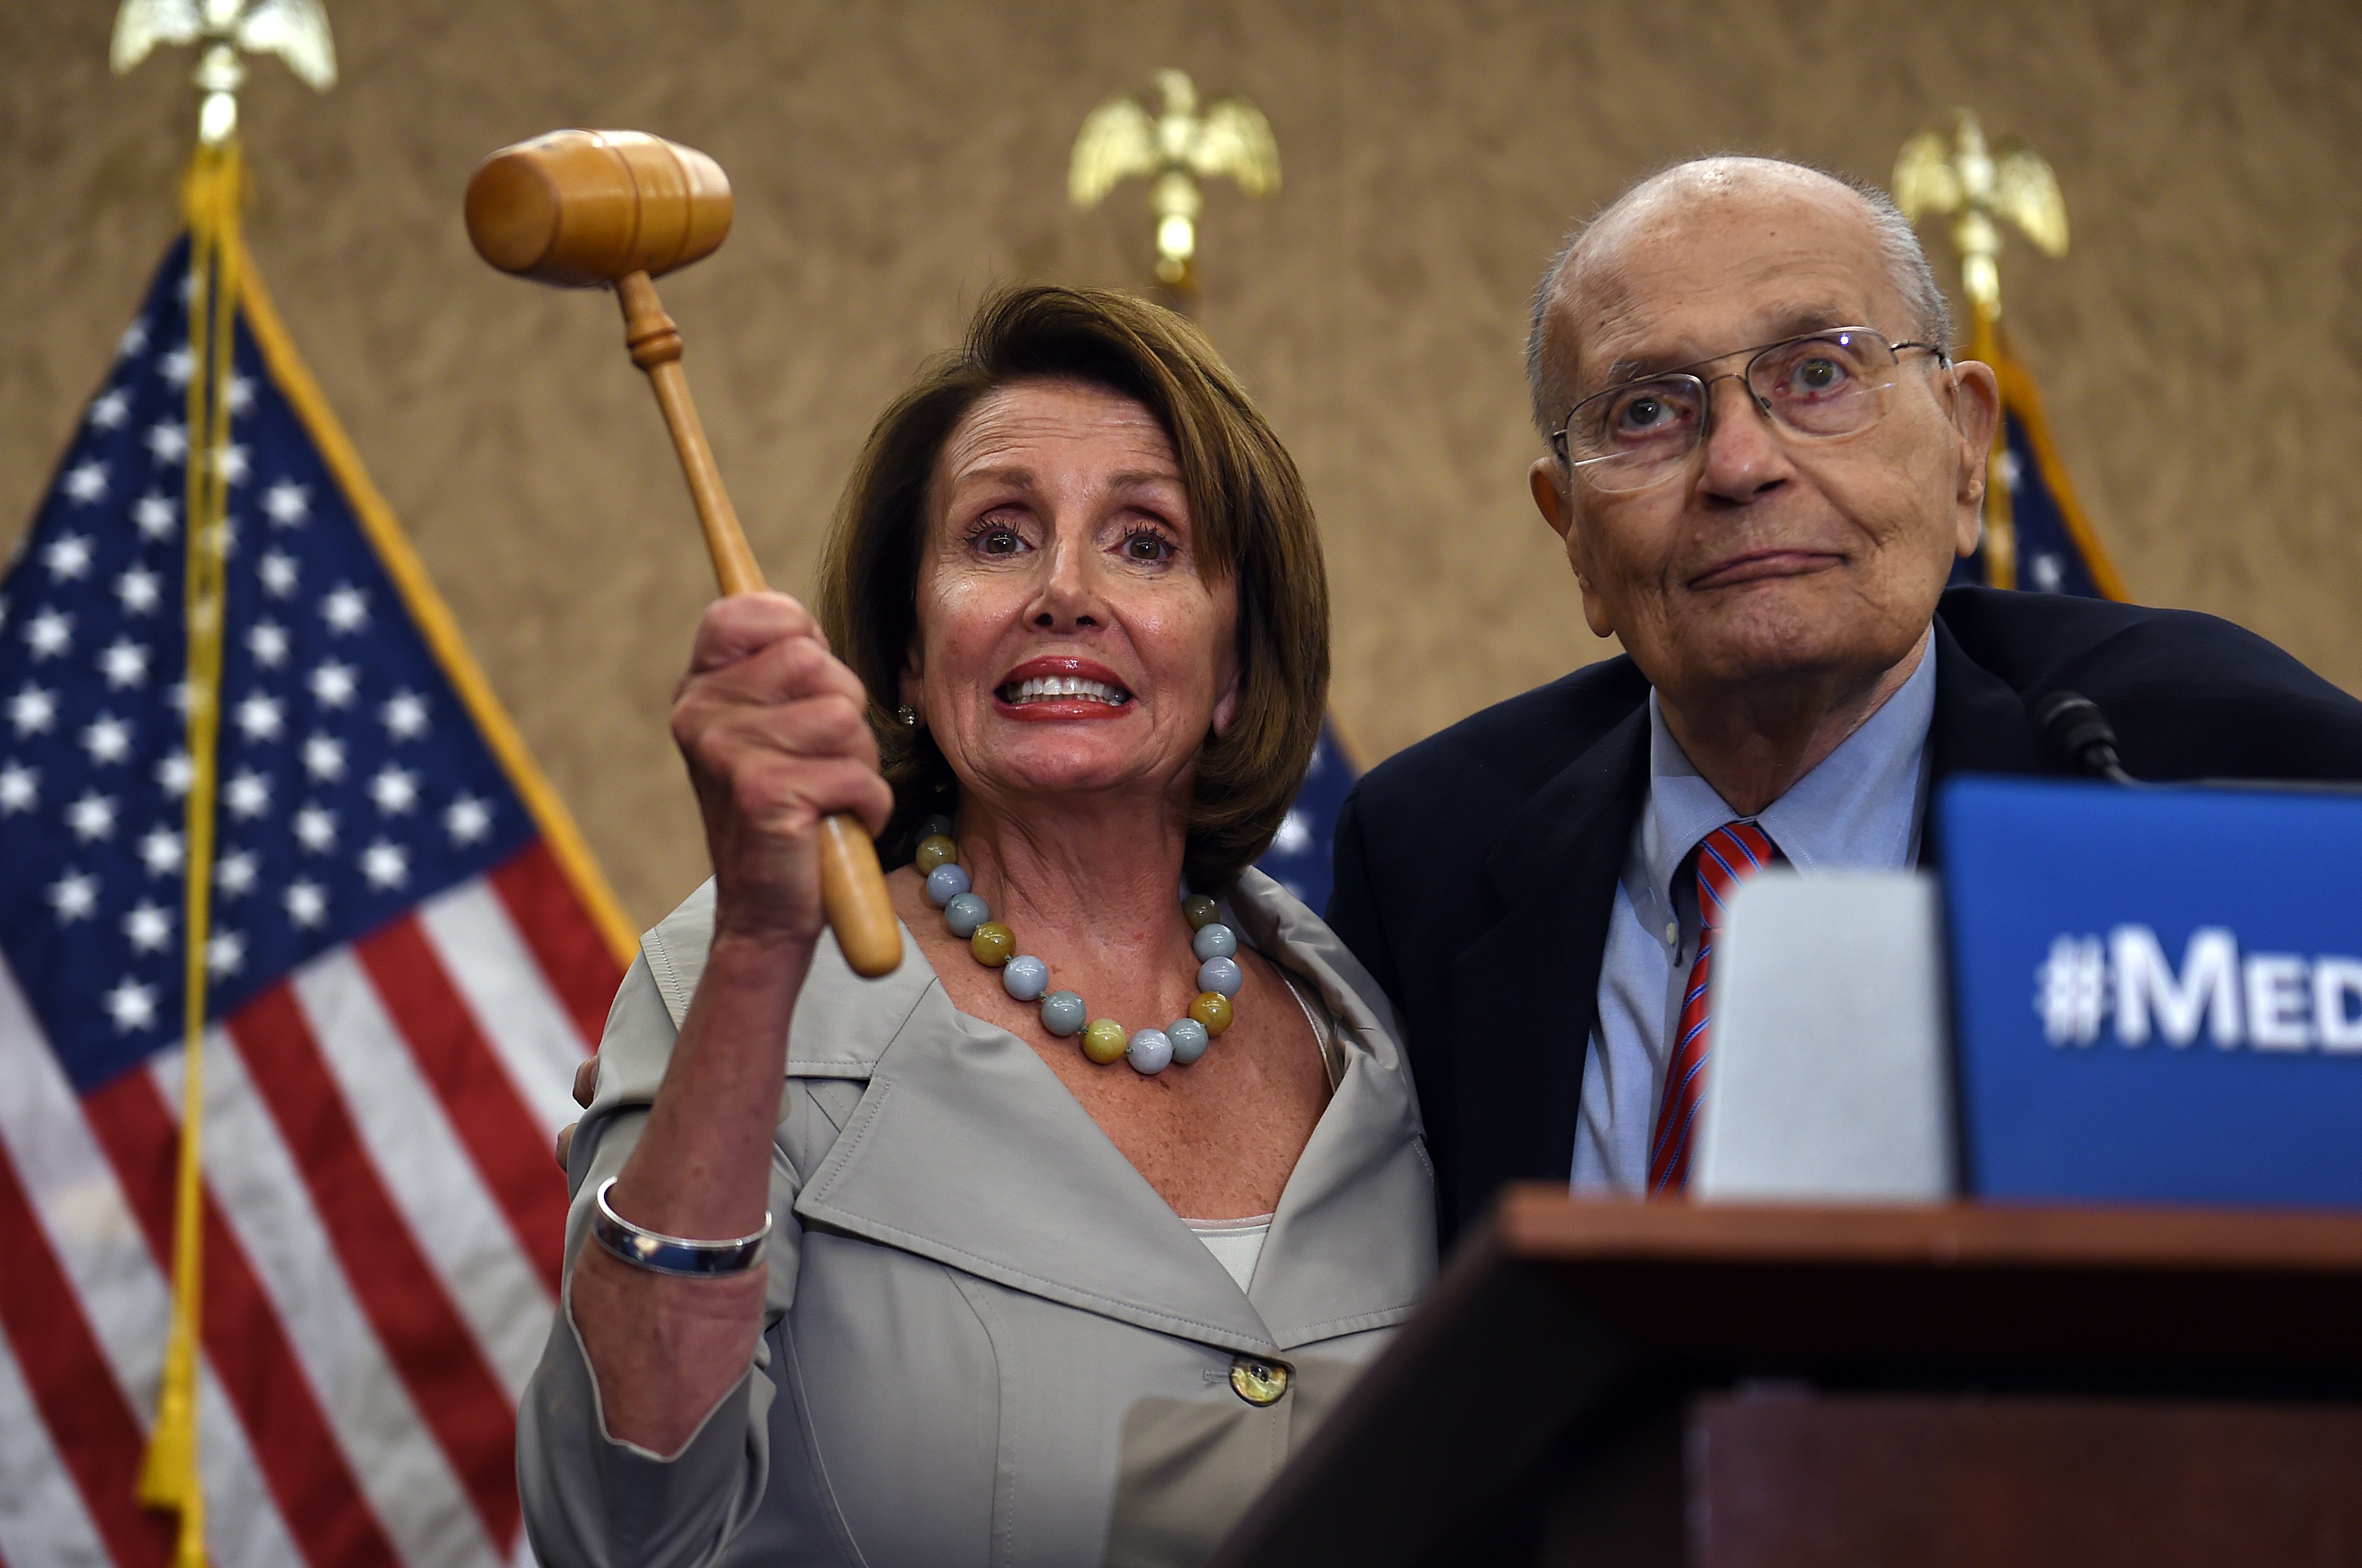 Democratic House Leader Nancy Pelosi, accompanied by former congressman John Dingell, marks the 50th Anniversary of Medicare and Medicaid on Capitol Hill on July 29, 2015 in Washington, DC.(Photo by Astrid Riecken/Getty Images)